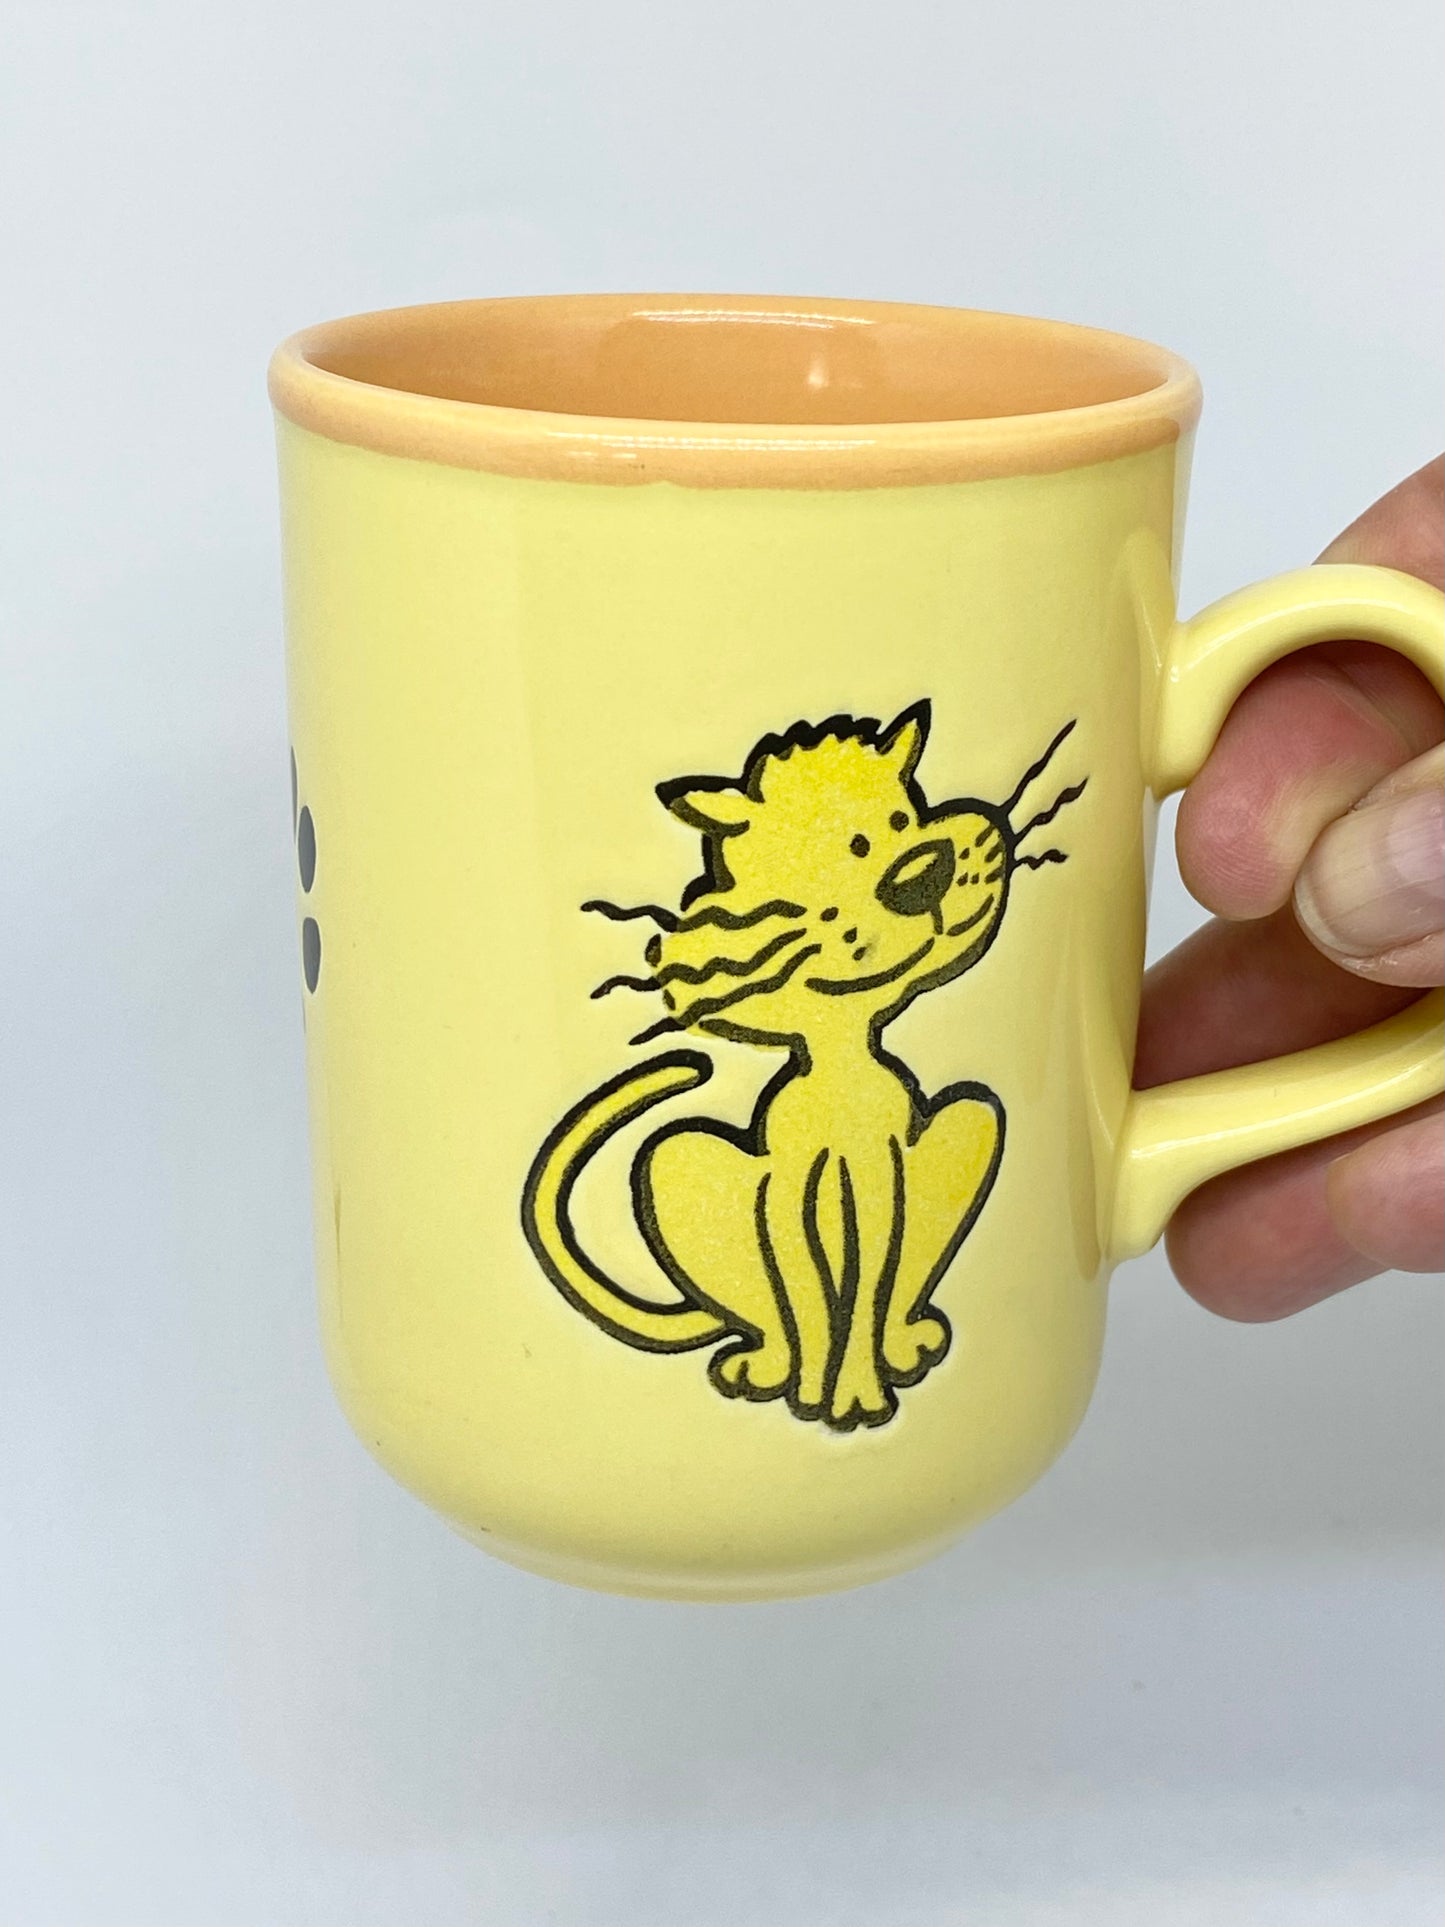 Retro Vintage Staffordshire cat cup - yellow with yellow cat